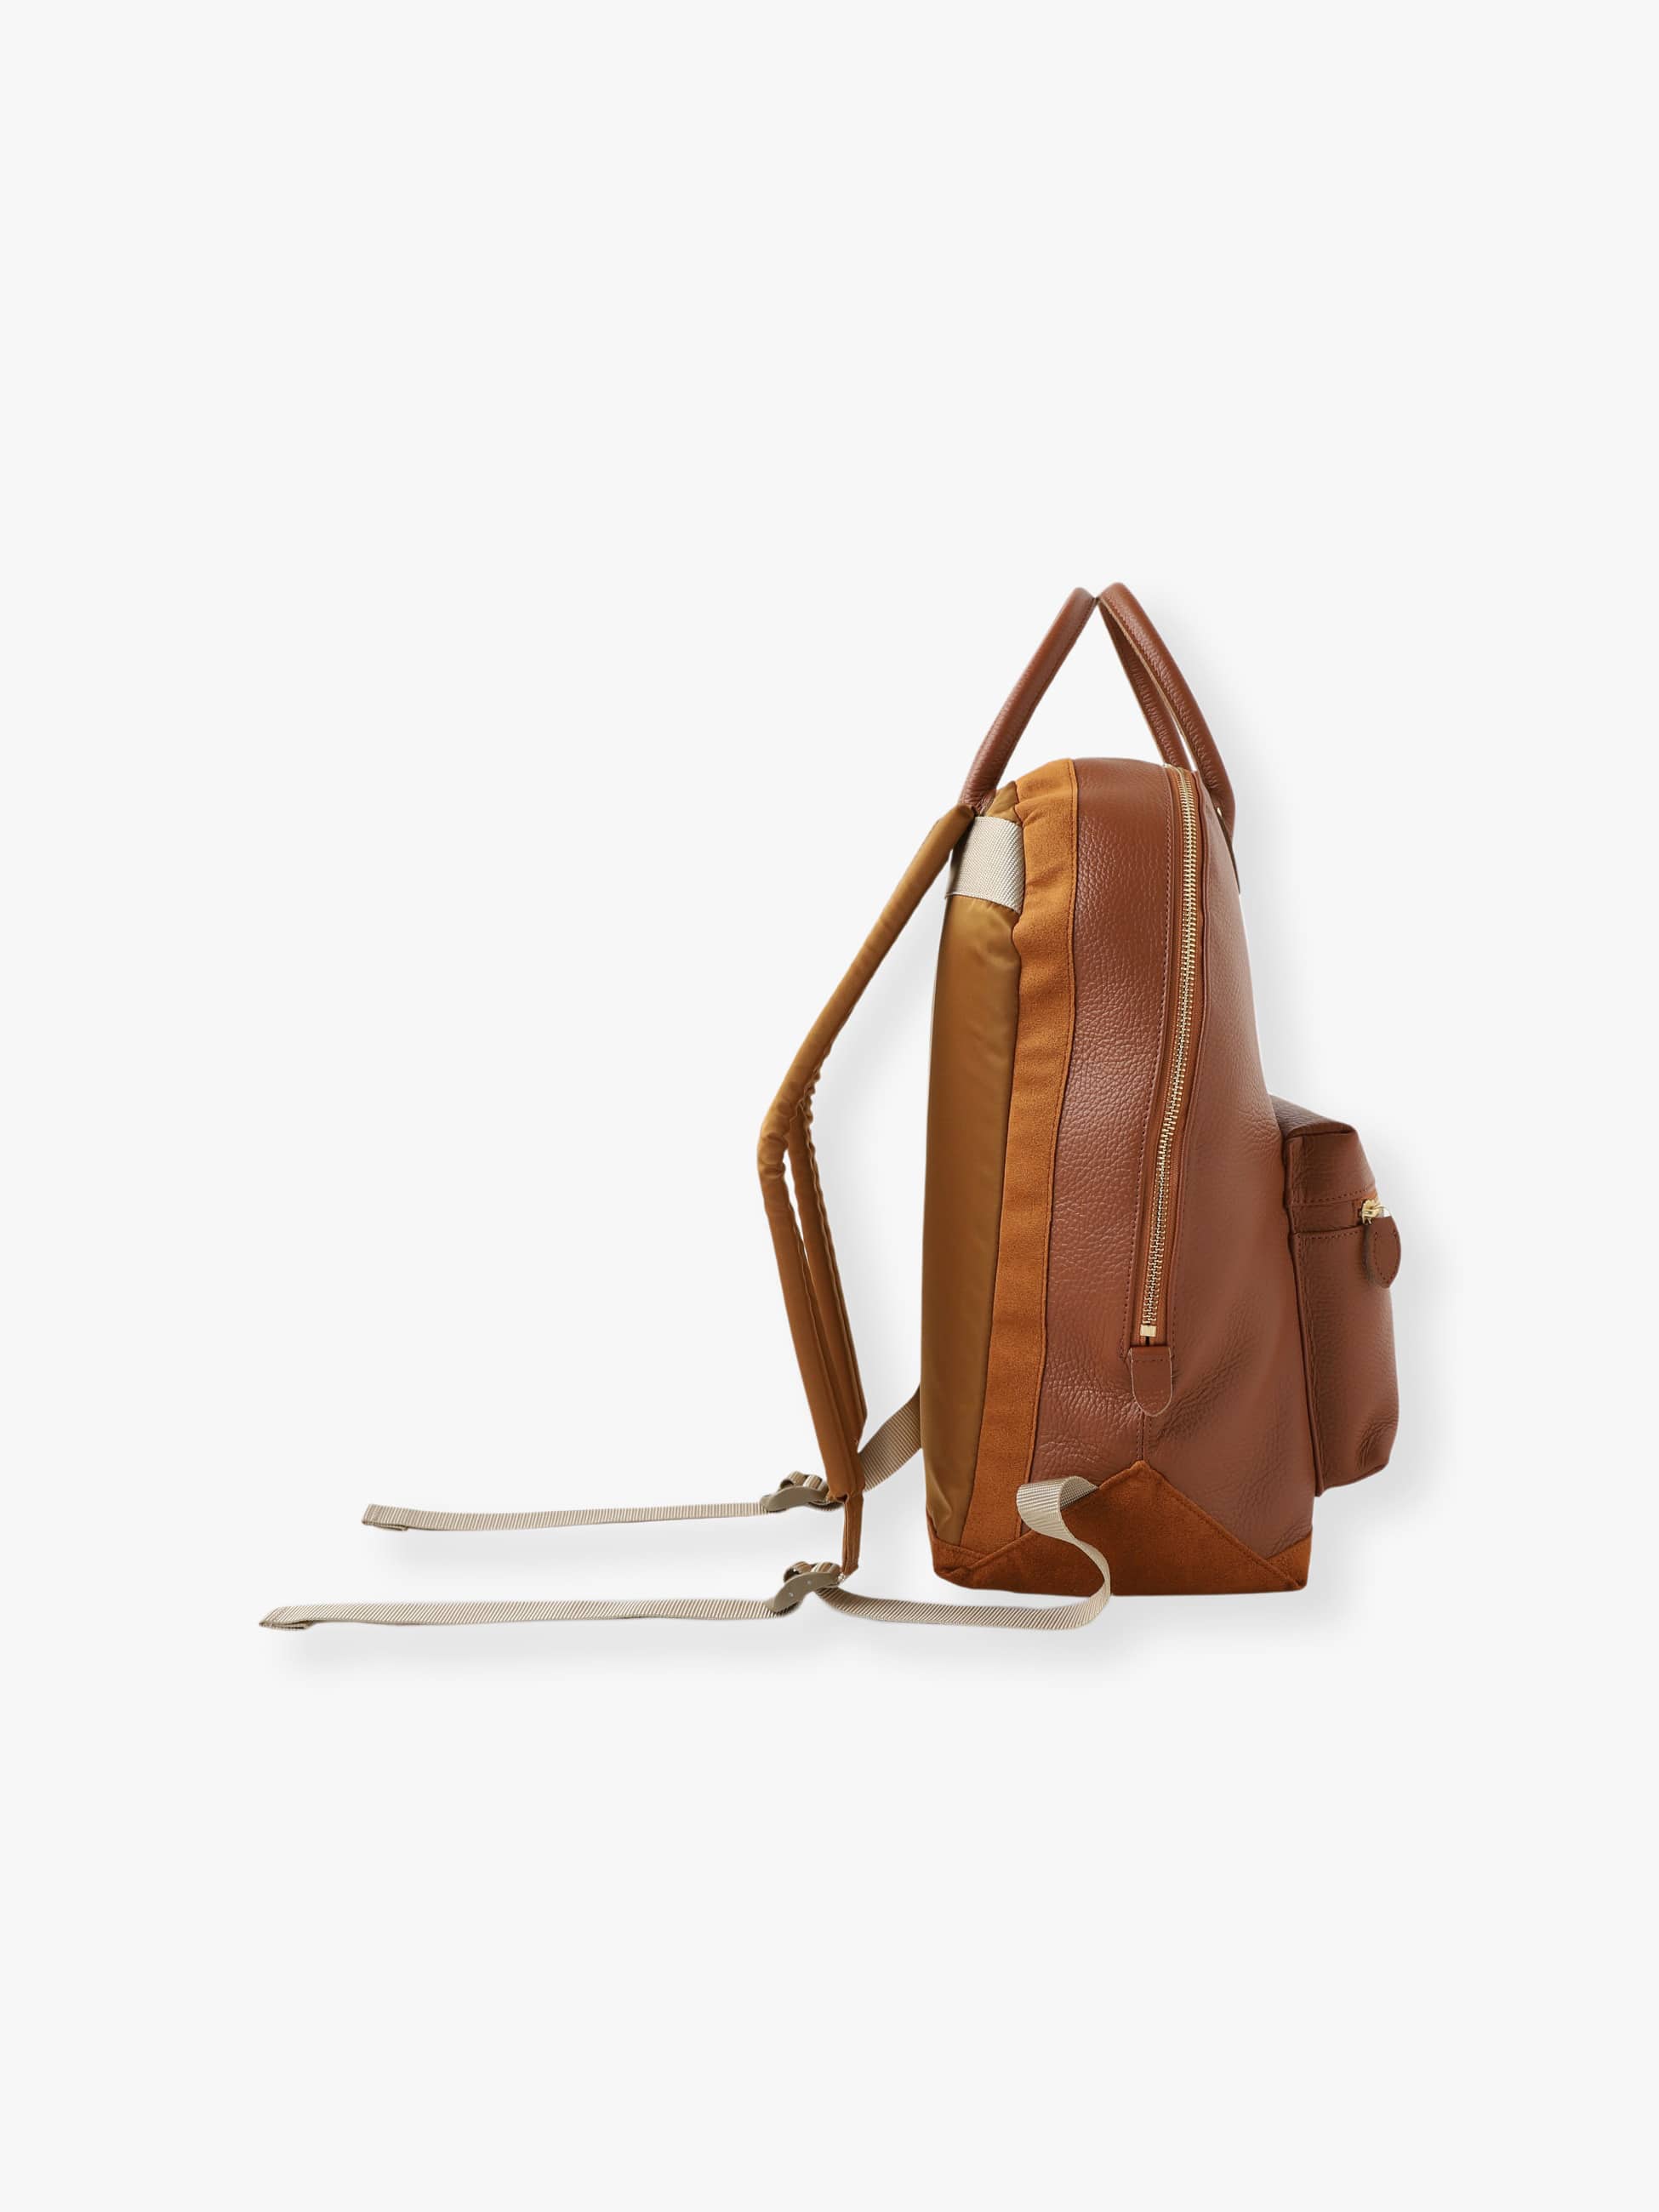 Embossed Leather Back Pack｜YOUNG & OLSEN the DRYGOODS STORE